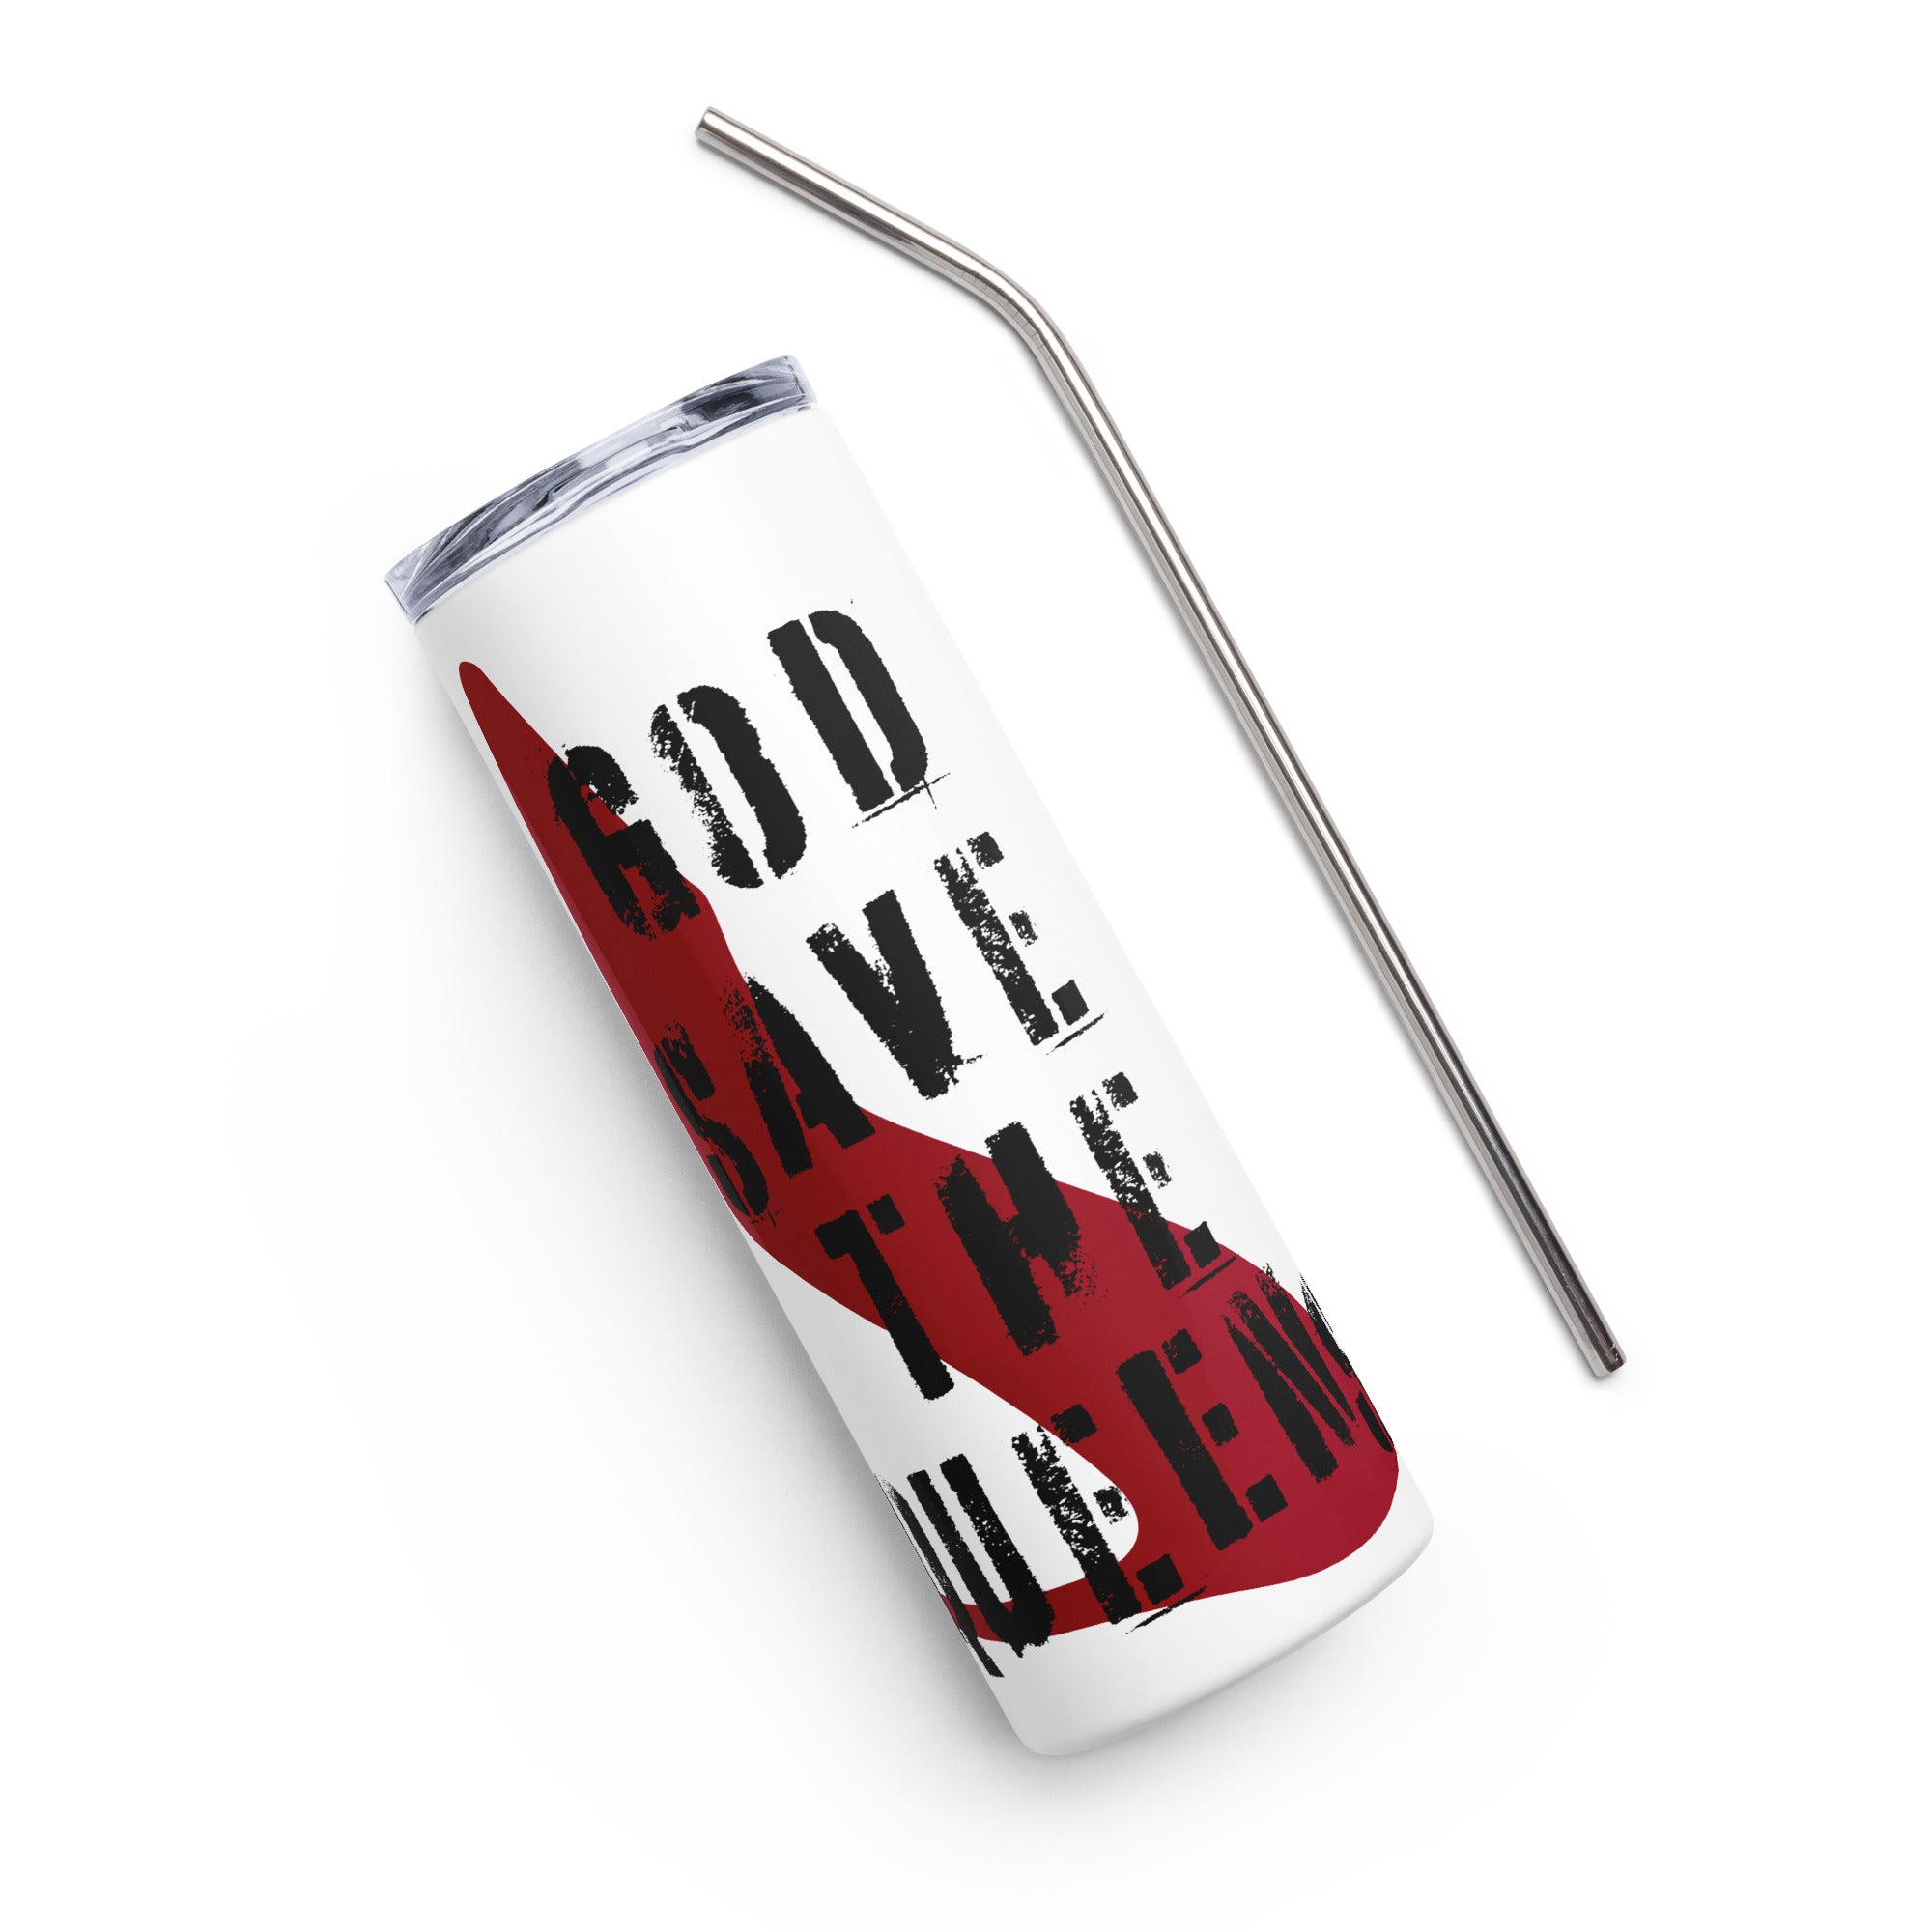 God Save the Queens Royal tumbler - Stainless steel